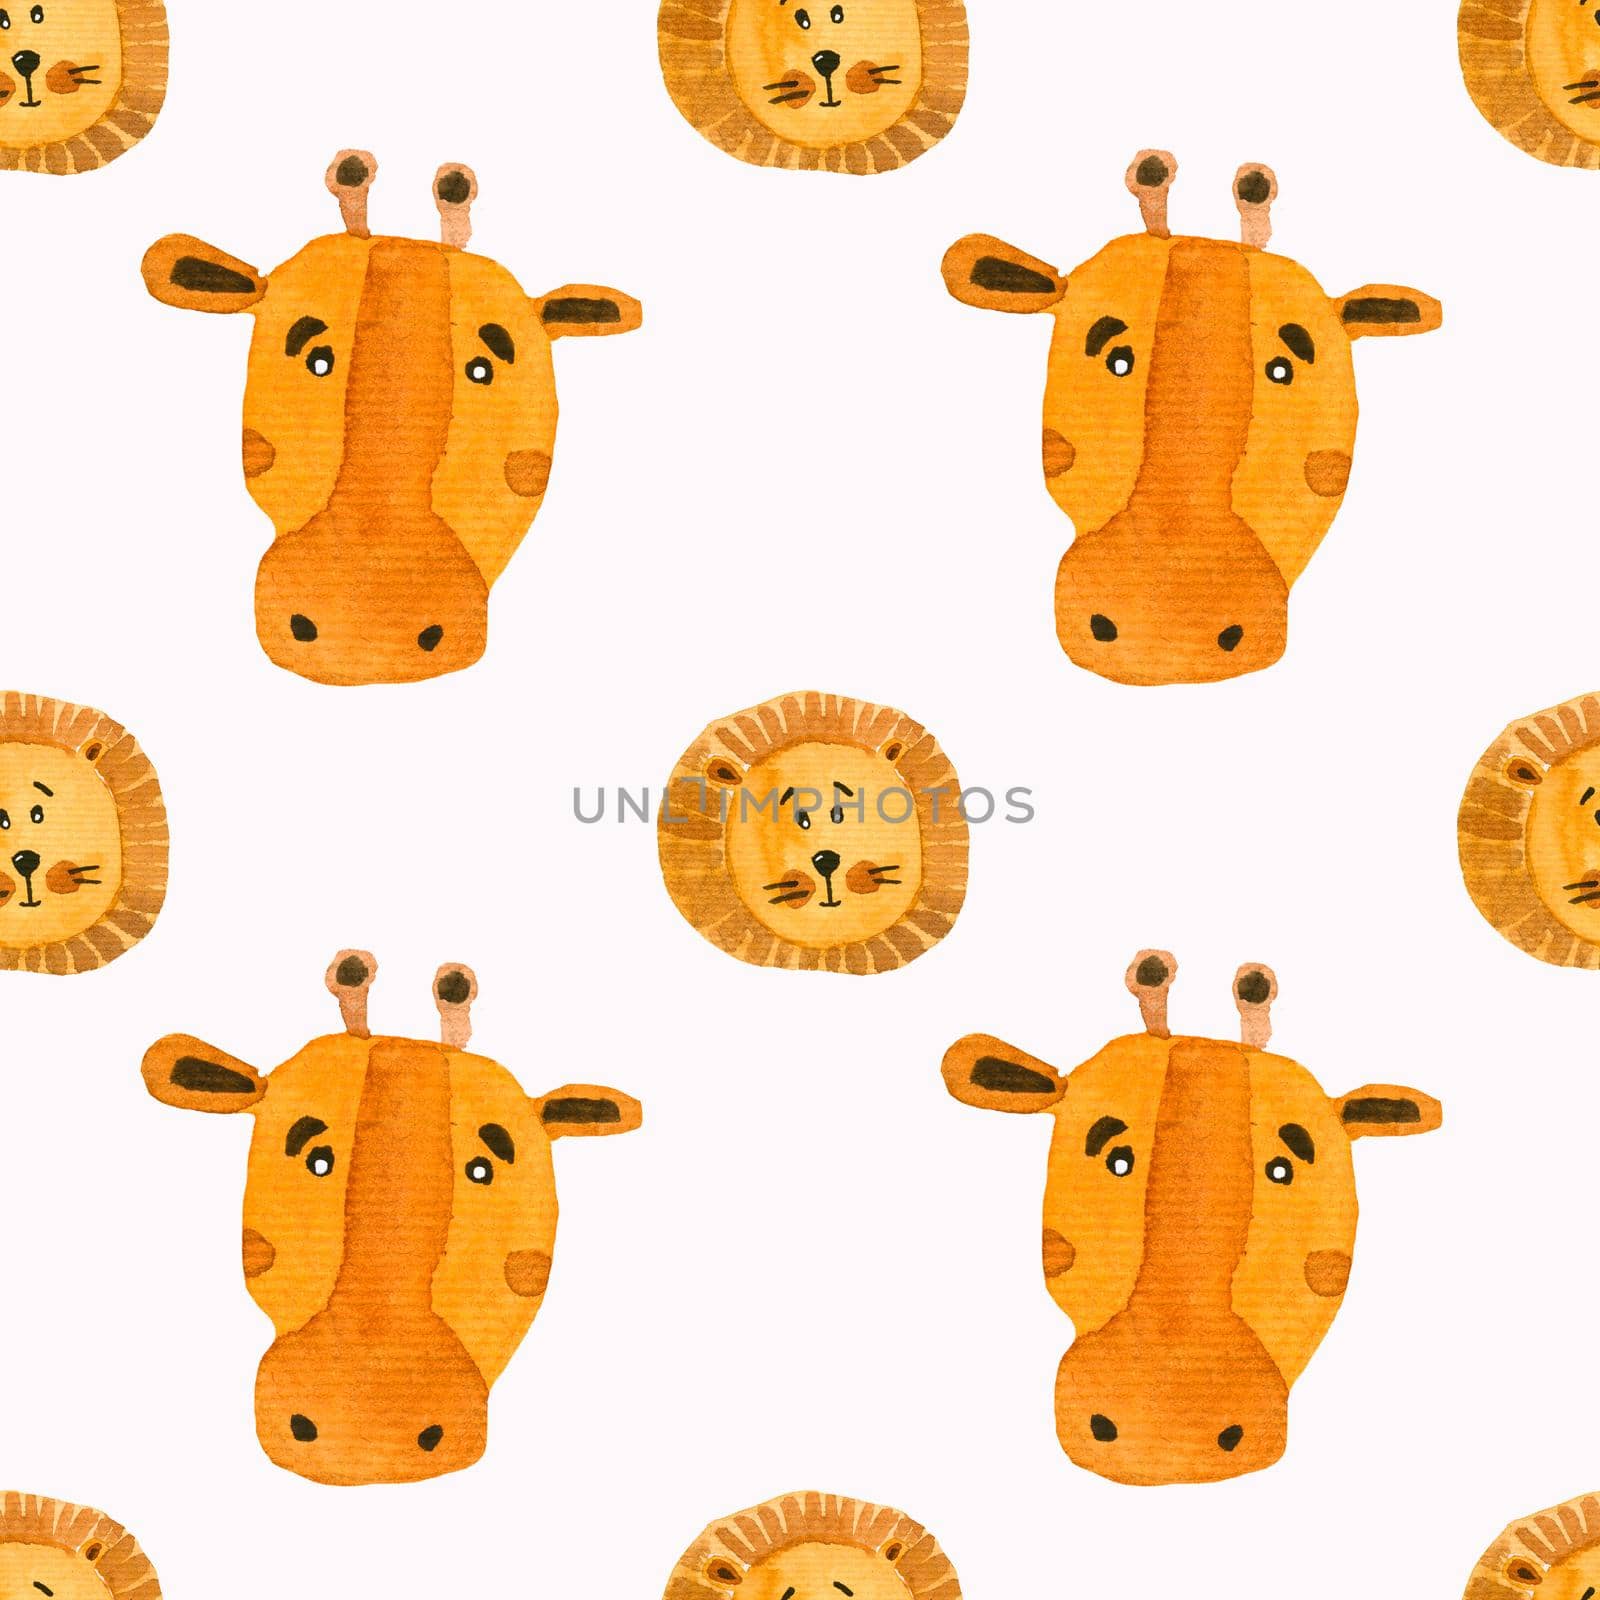 Seamless watercolor pattern of round lion and giraffe muzzles. Cute funny pattern for kids in orange.